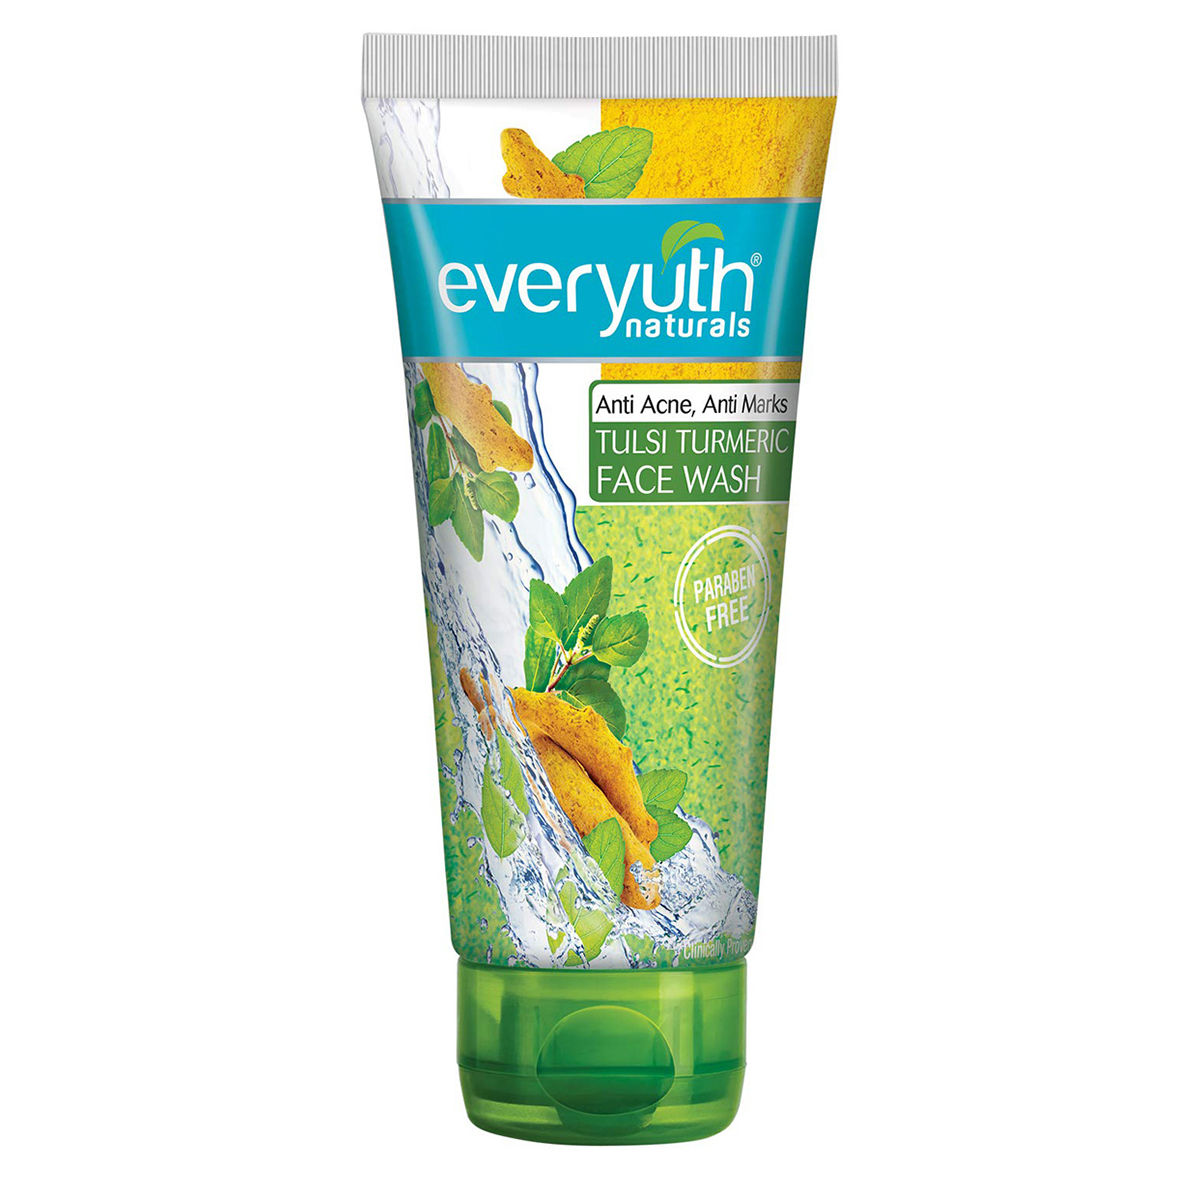 Everyuth Tulsi Turmeric Face Wash Gm Uses Side Effects Price